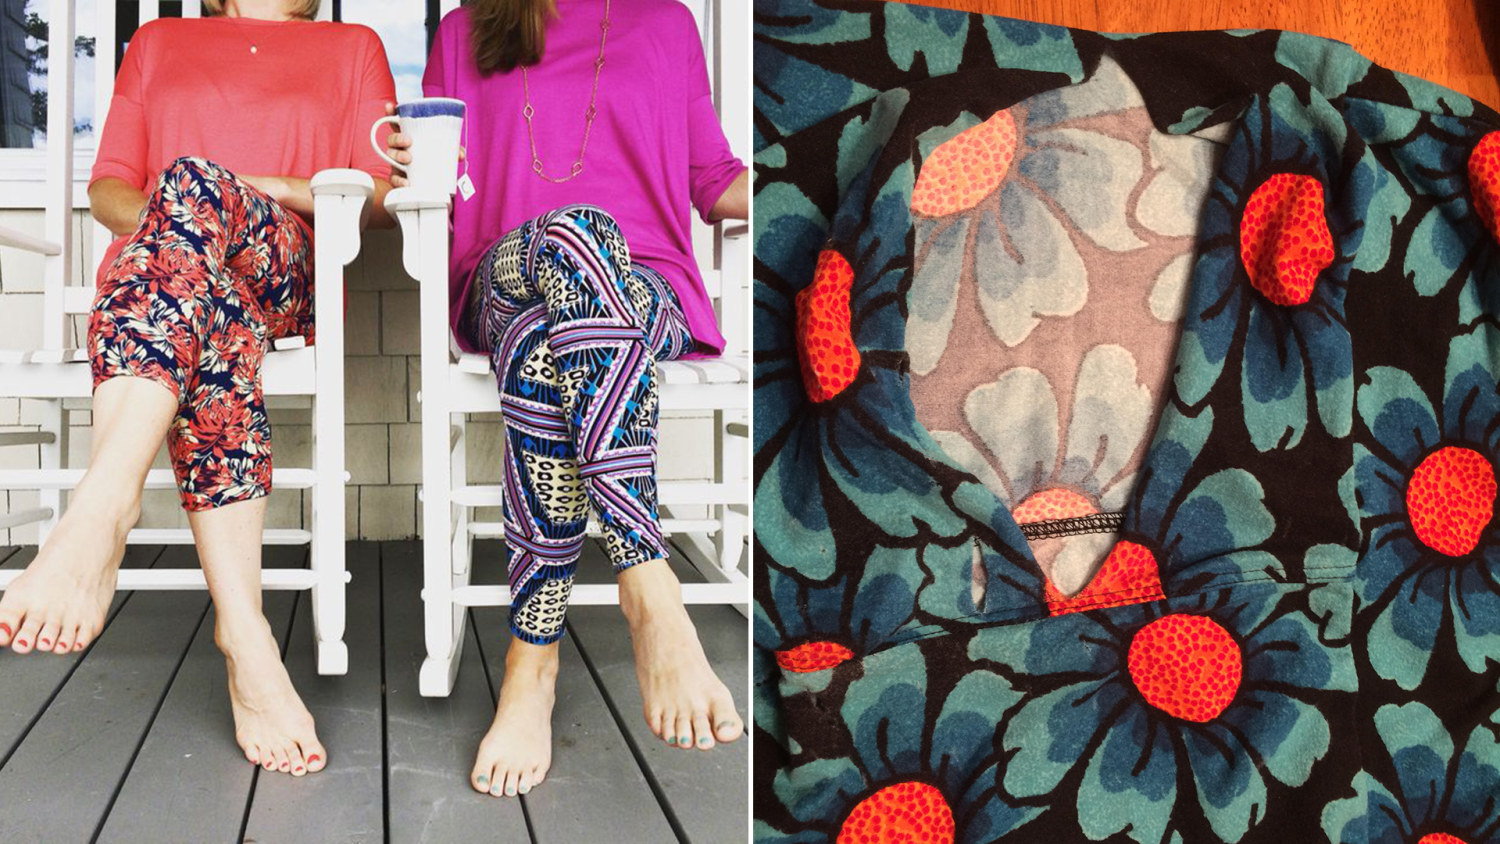 See why local LuLaRoe fans are torn